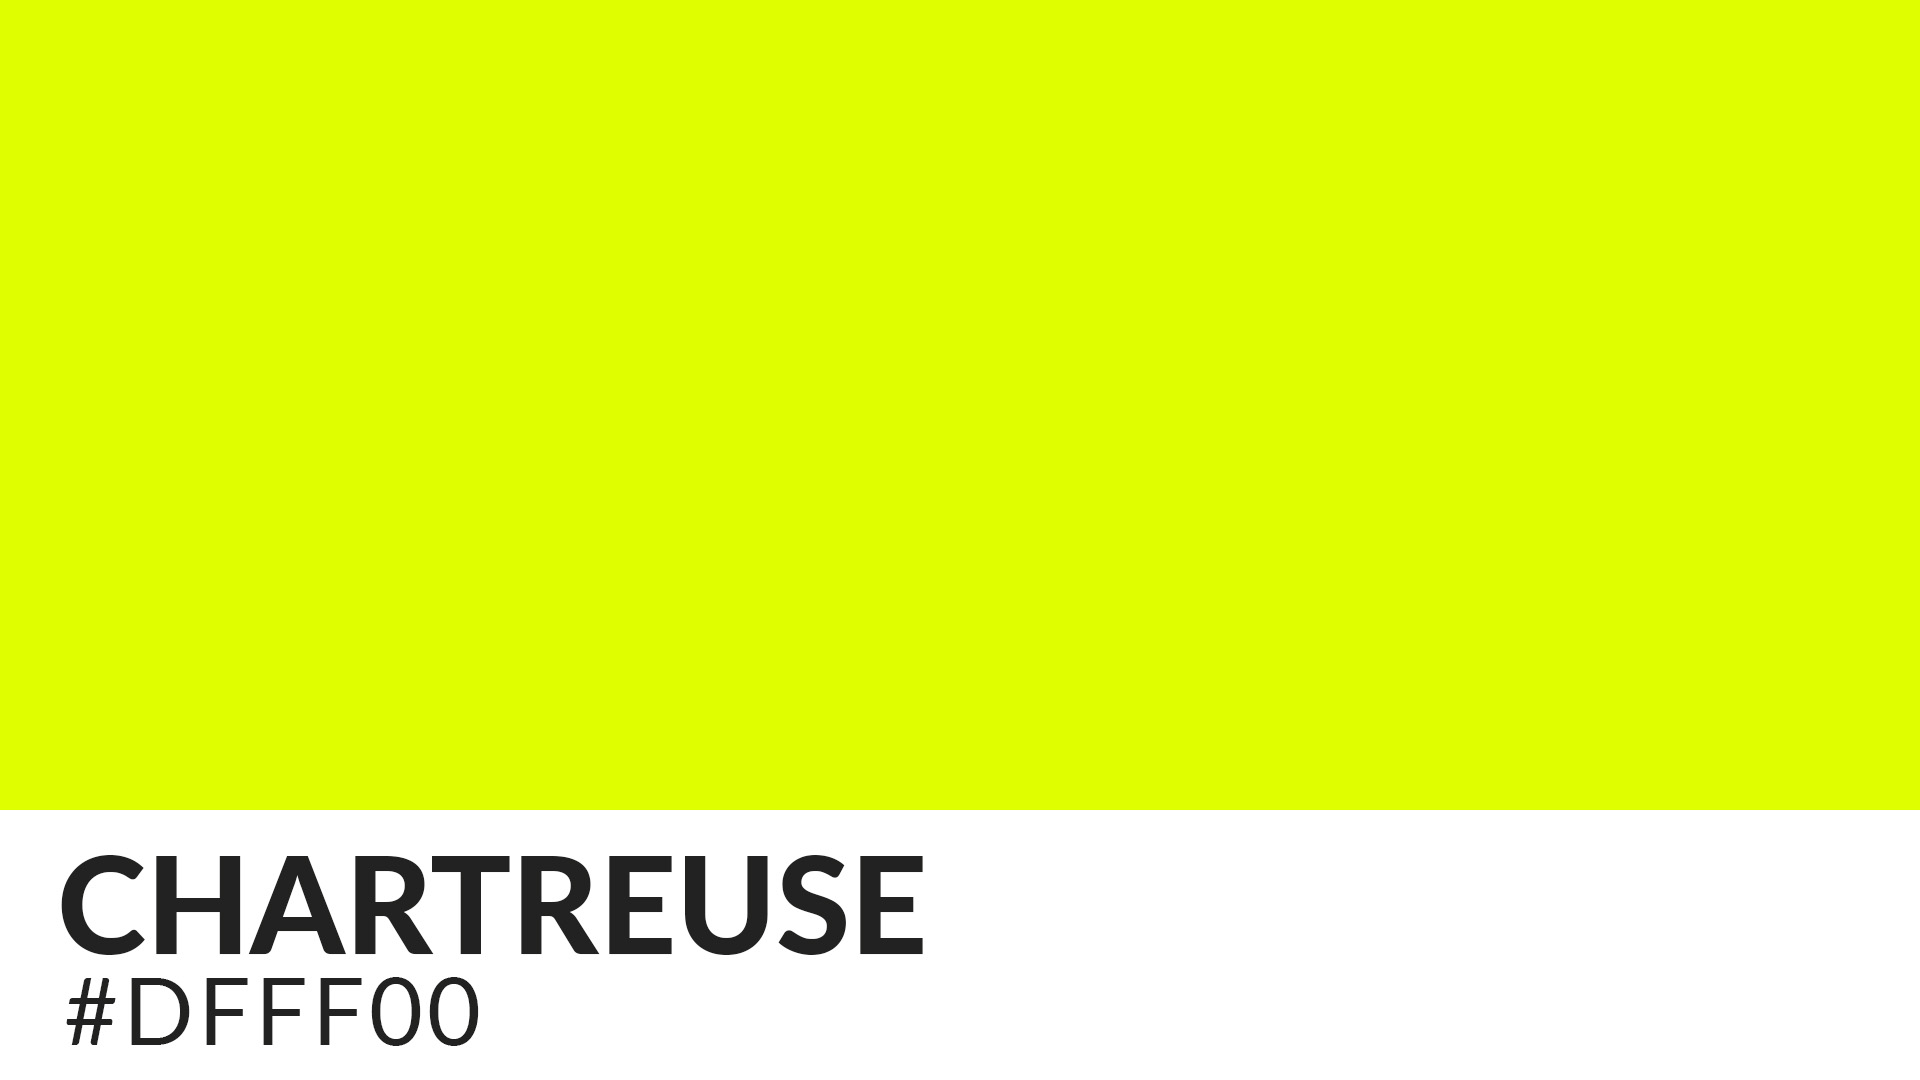 Chartreuse Color